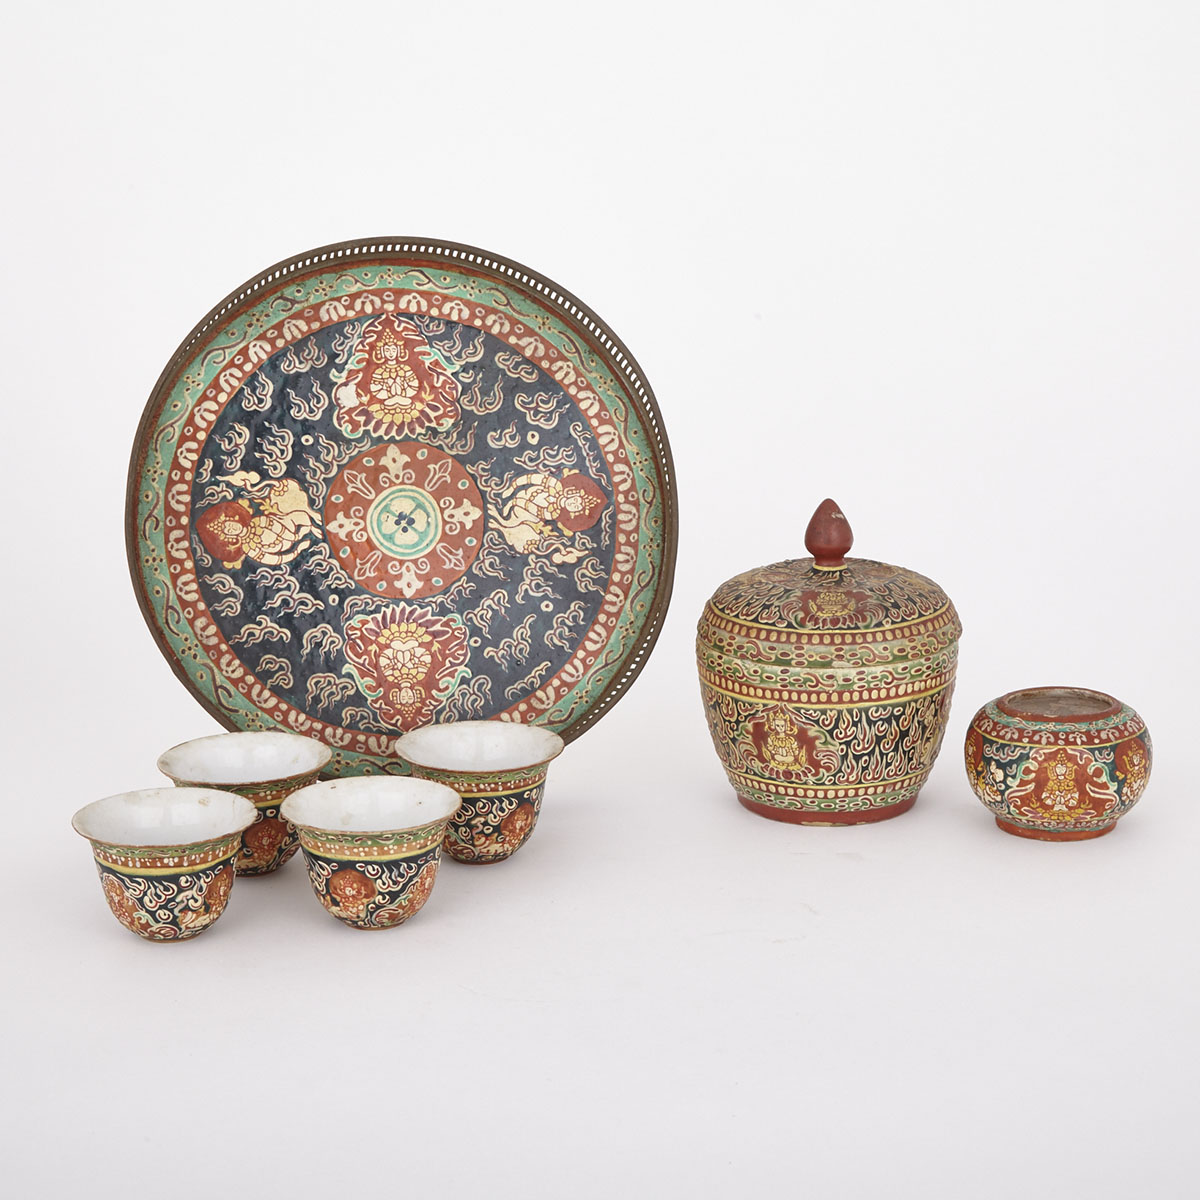 Thai Porcelain and Copper Serving Set, Siam, Early 20th Century